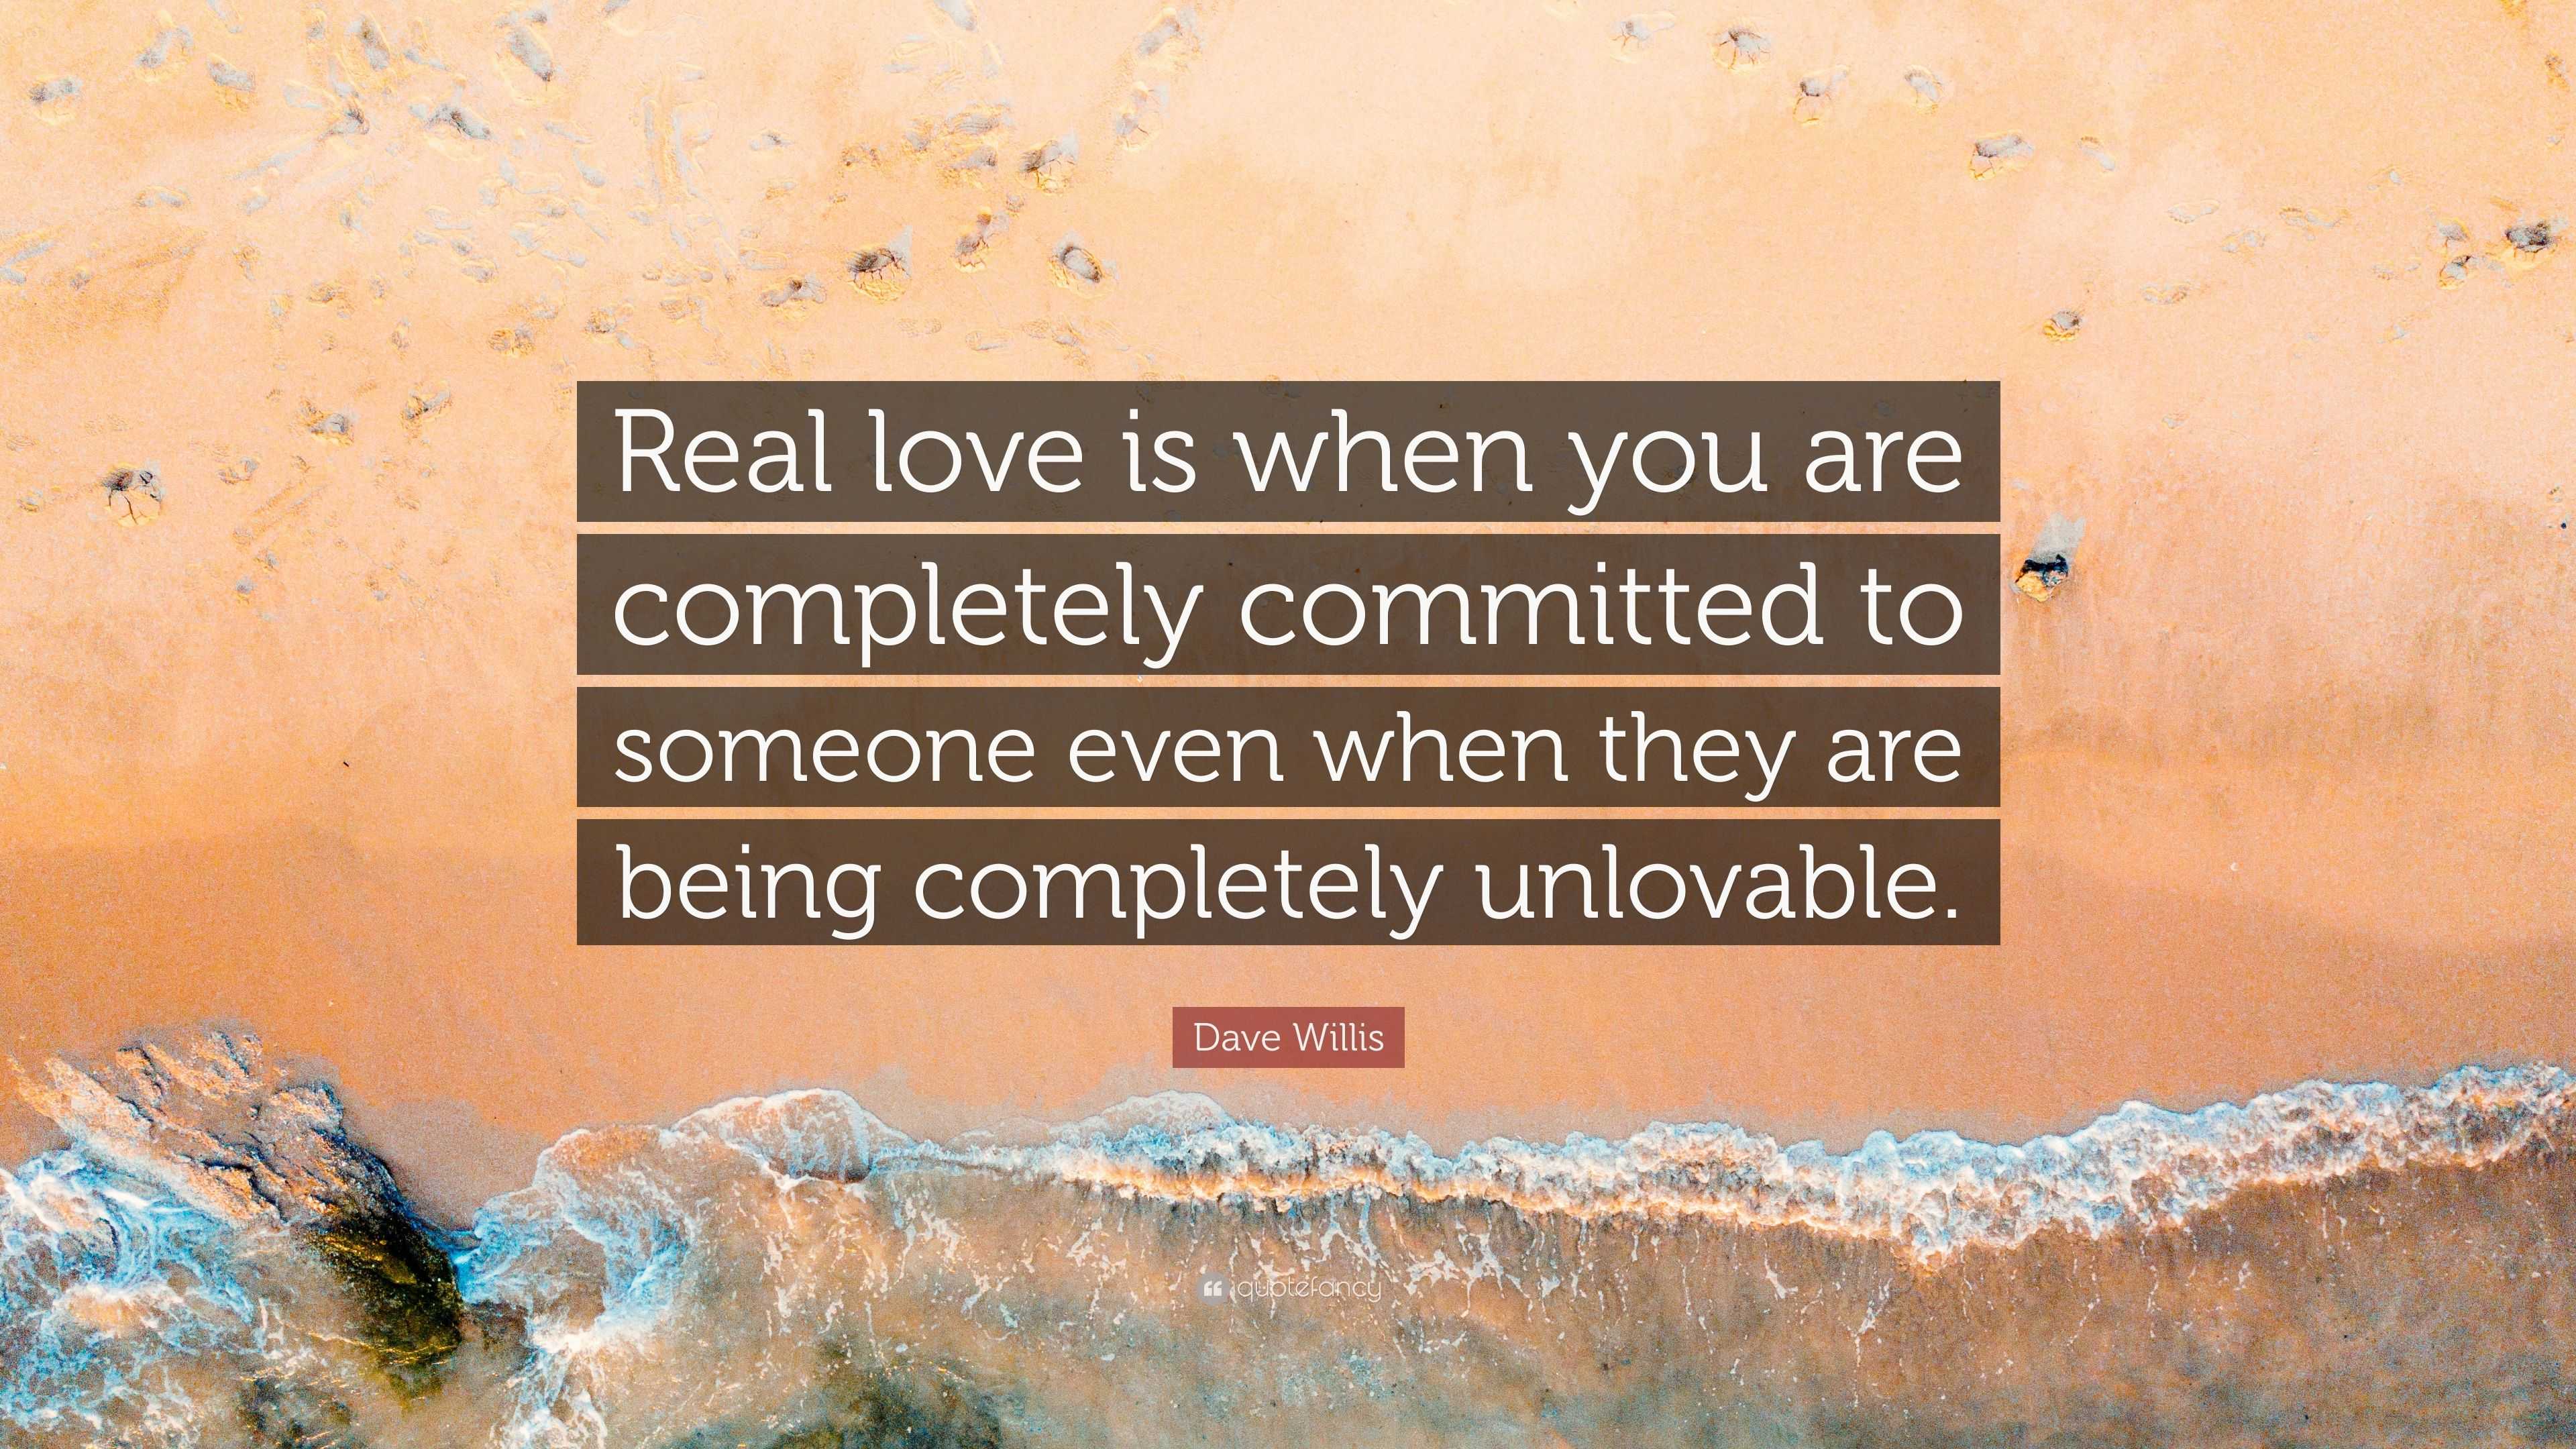 Dave Willis Quote Real Love Is When You Are Completely Committed To Someone Even When They Are